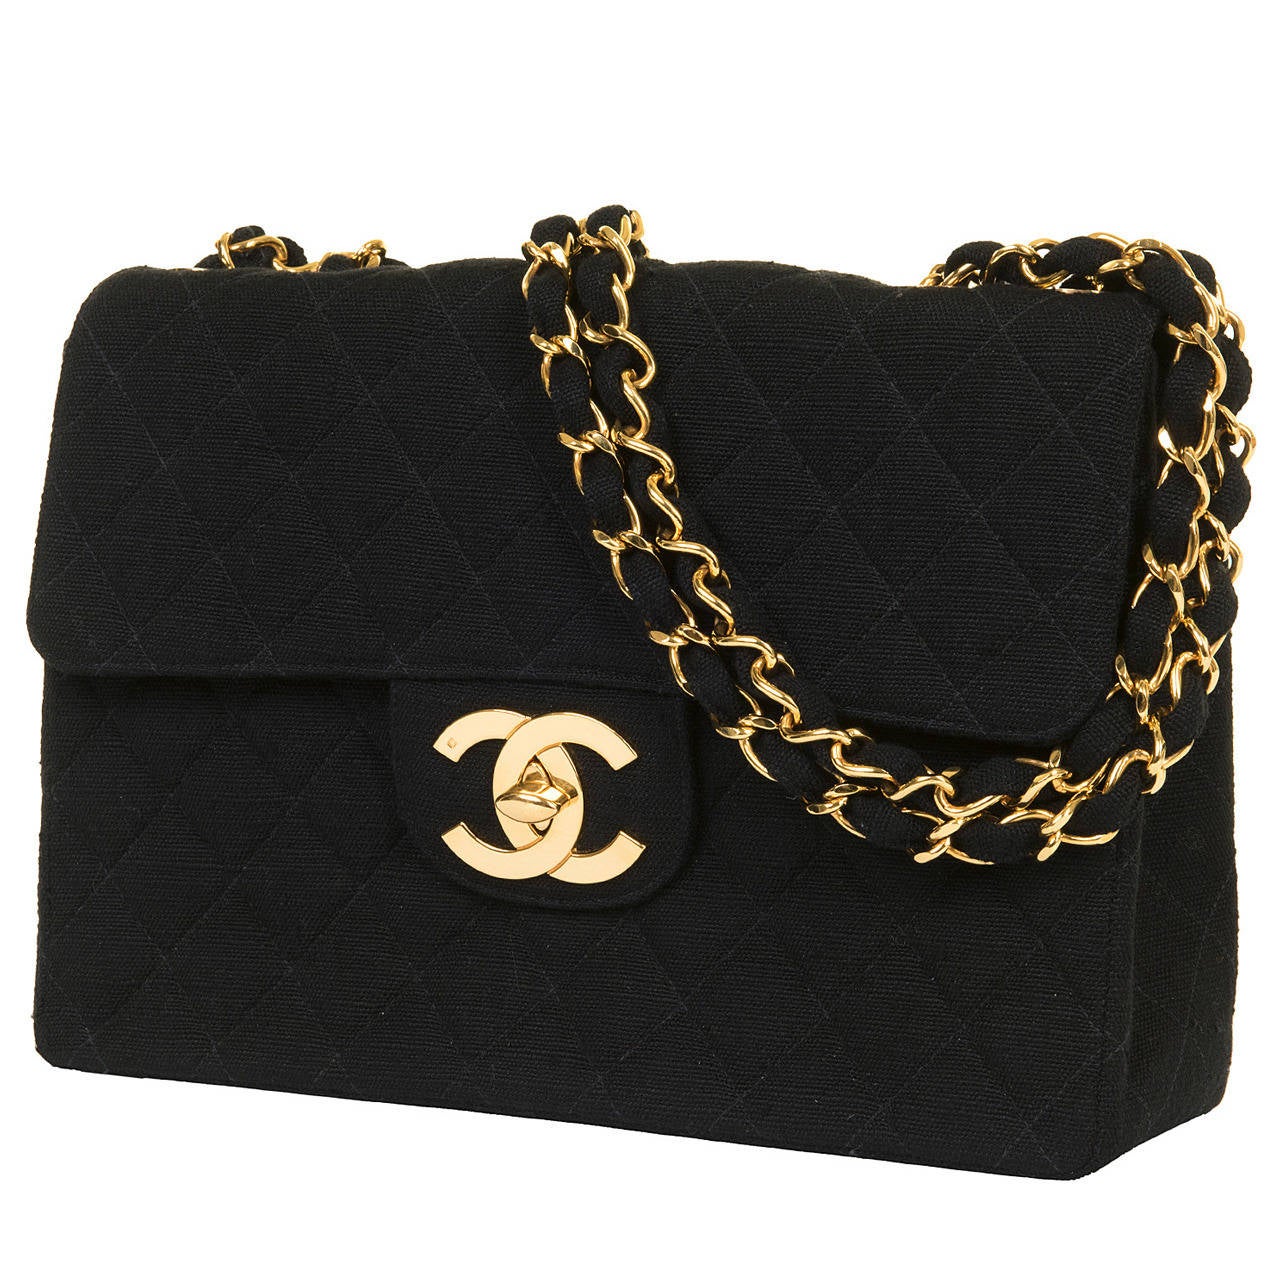 A Rare Chanel Black 'Shantung' Linen - Quilted JUMBO Bag with Goldtone Hardware